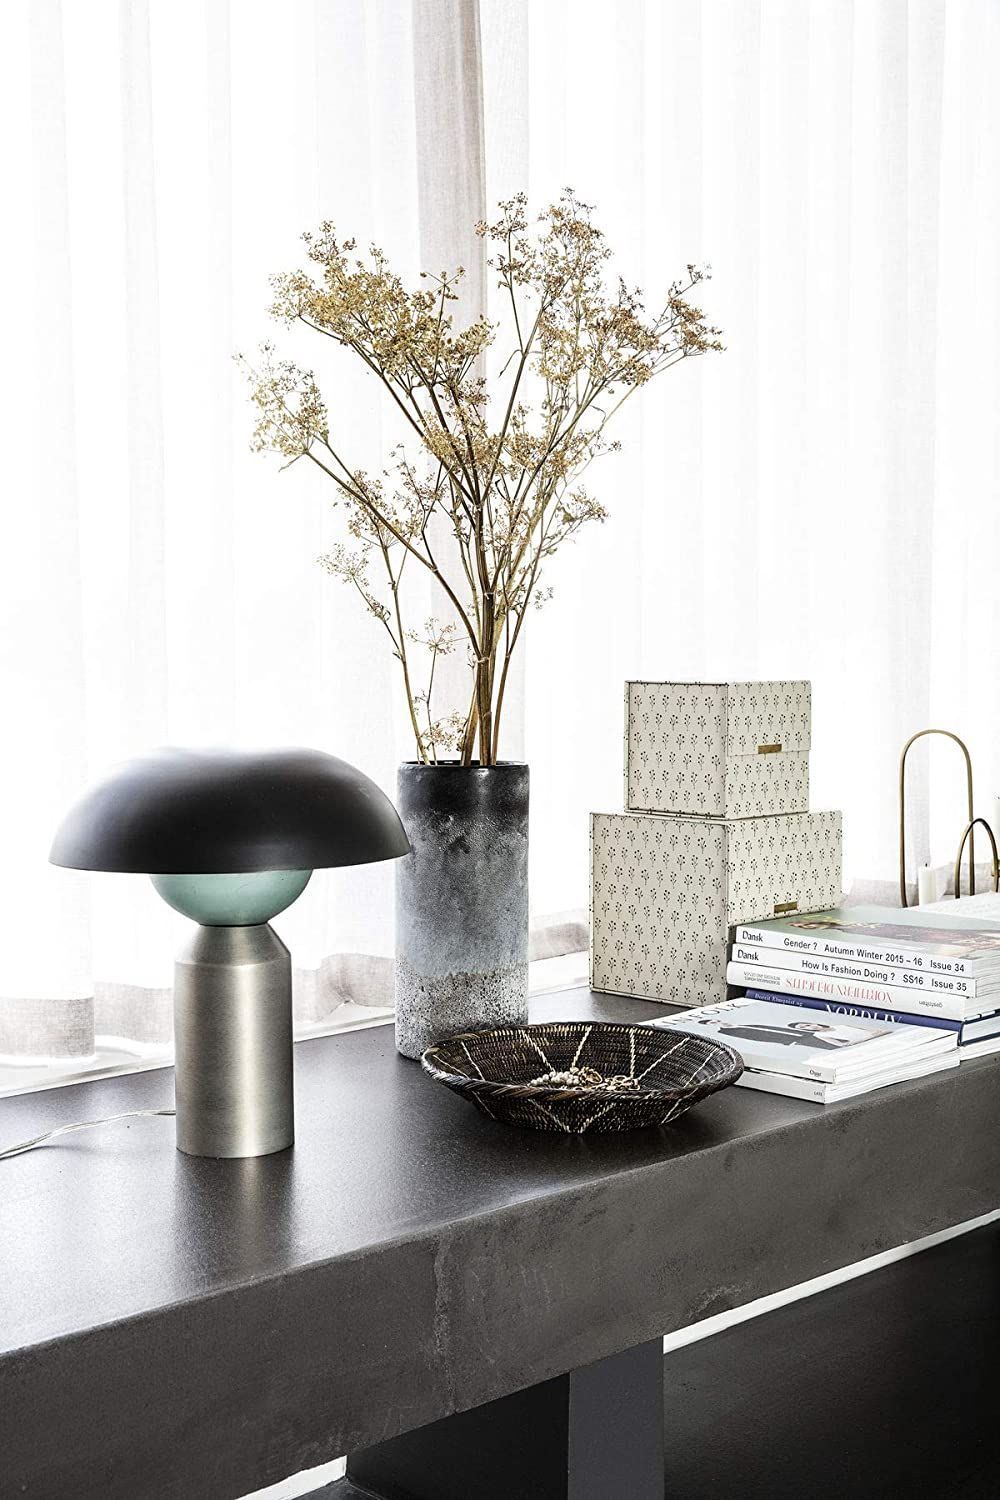 10 -A table lamp with a futuristic design by House Doctor